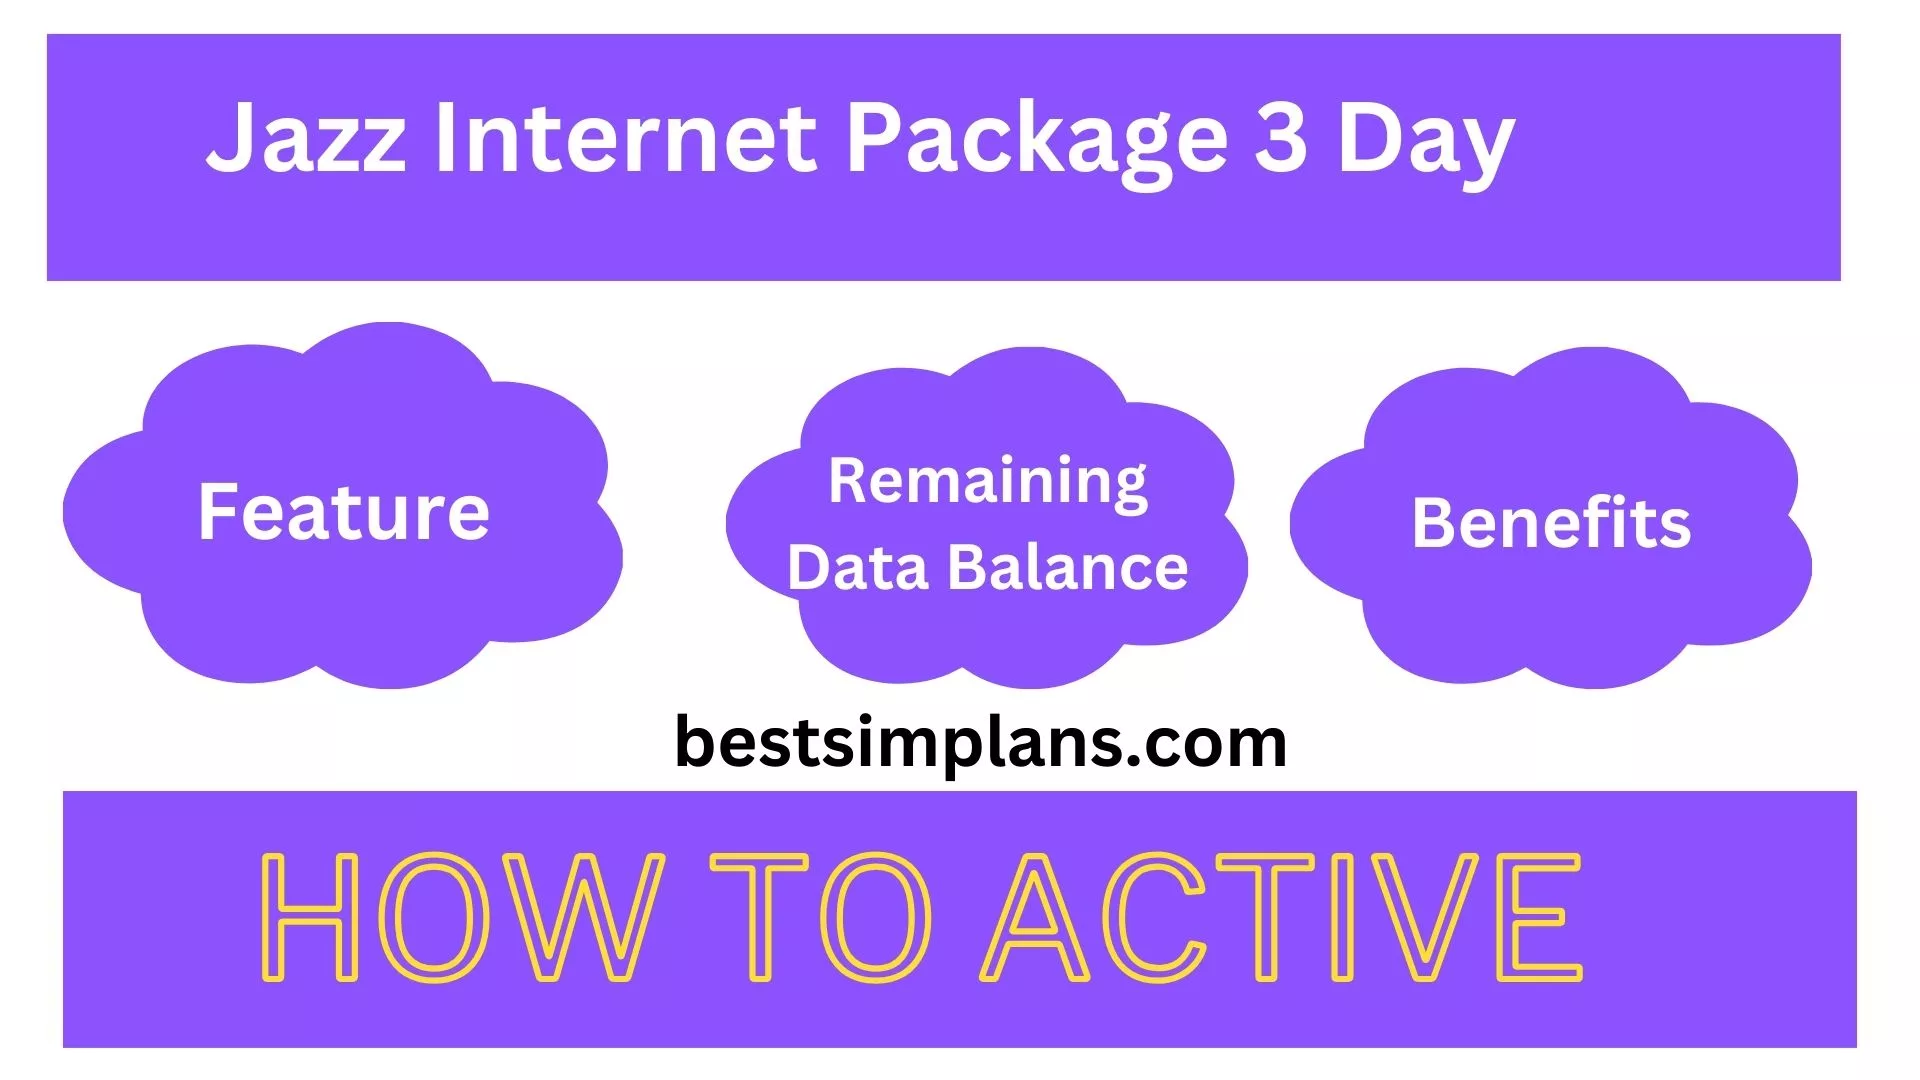 Jazz Internet Package 3 Day